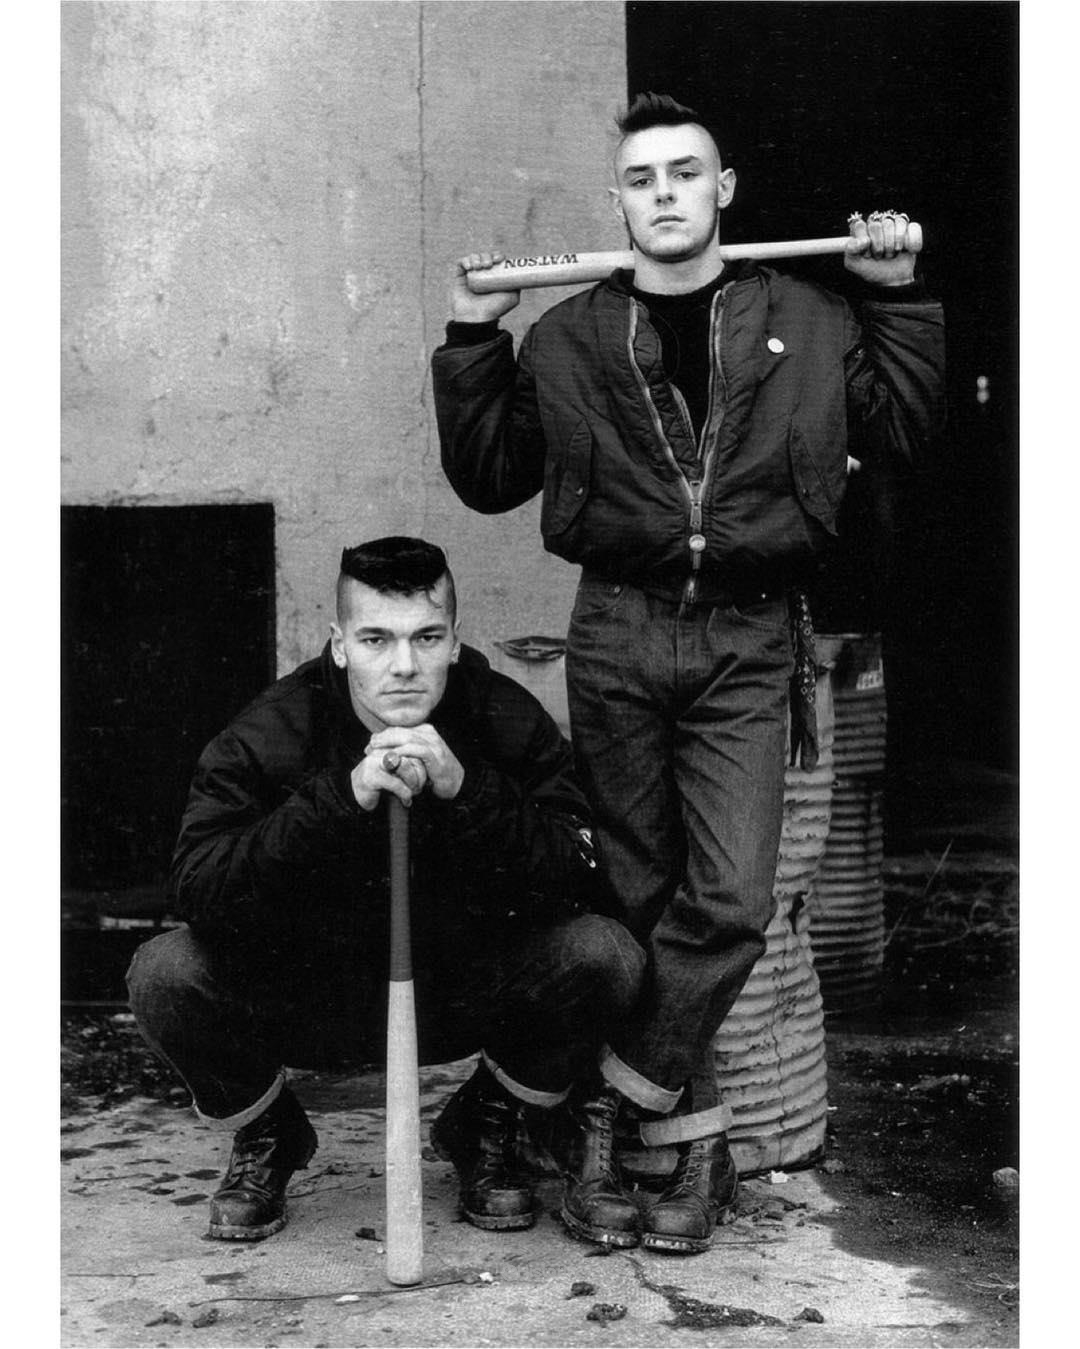 Members of the Red Warriors – a Paris street gang that used violent force to remove neo-Nazis from France in the mid-late 1980s.